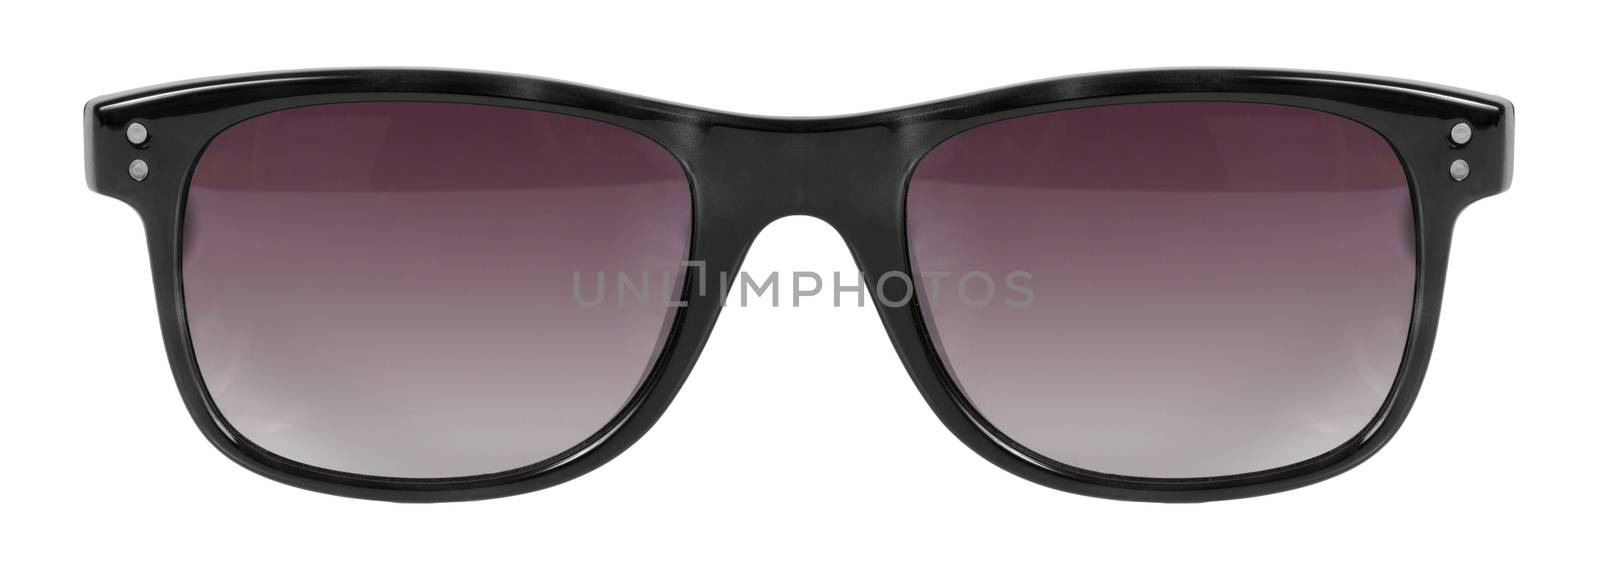 Sunglasses black frame and red color lens isolated against a cle by keneaster